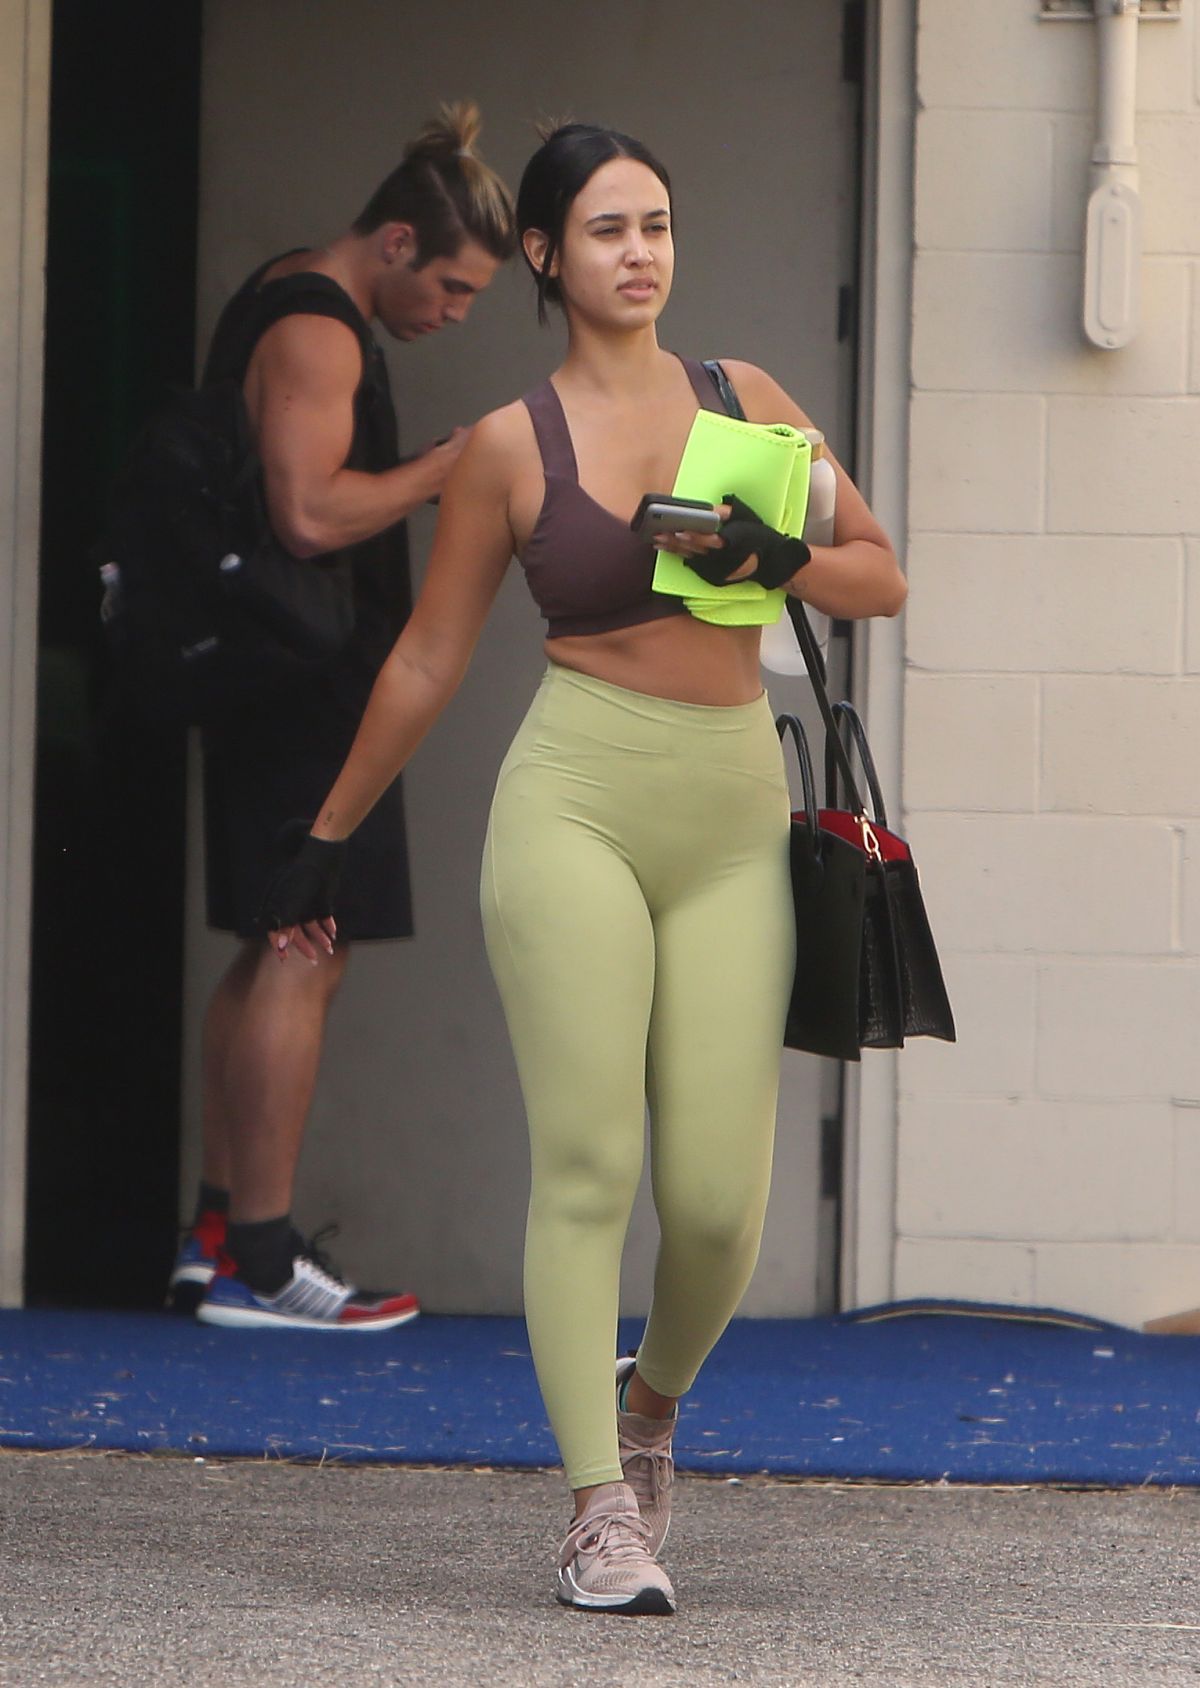 Emily Tosta seen in Tights After Leaves a Gym in Los Angeles, Oct 2022